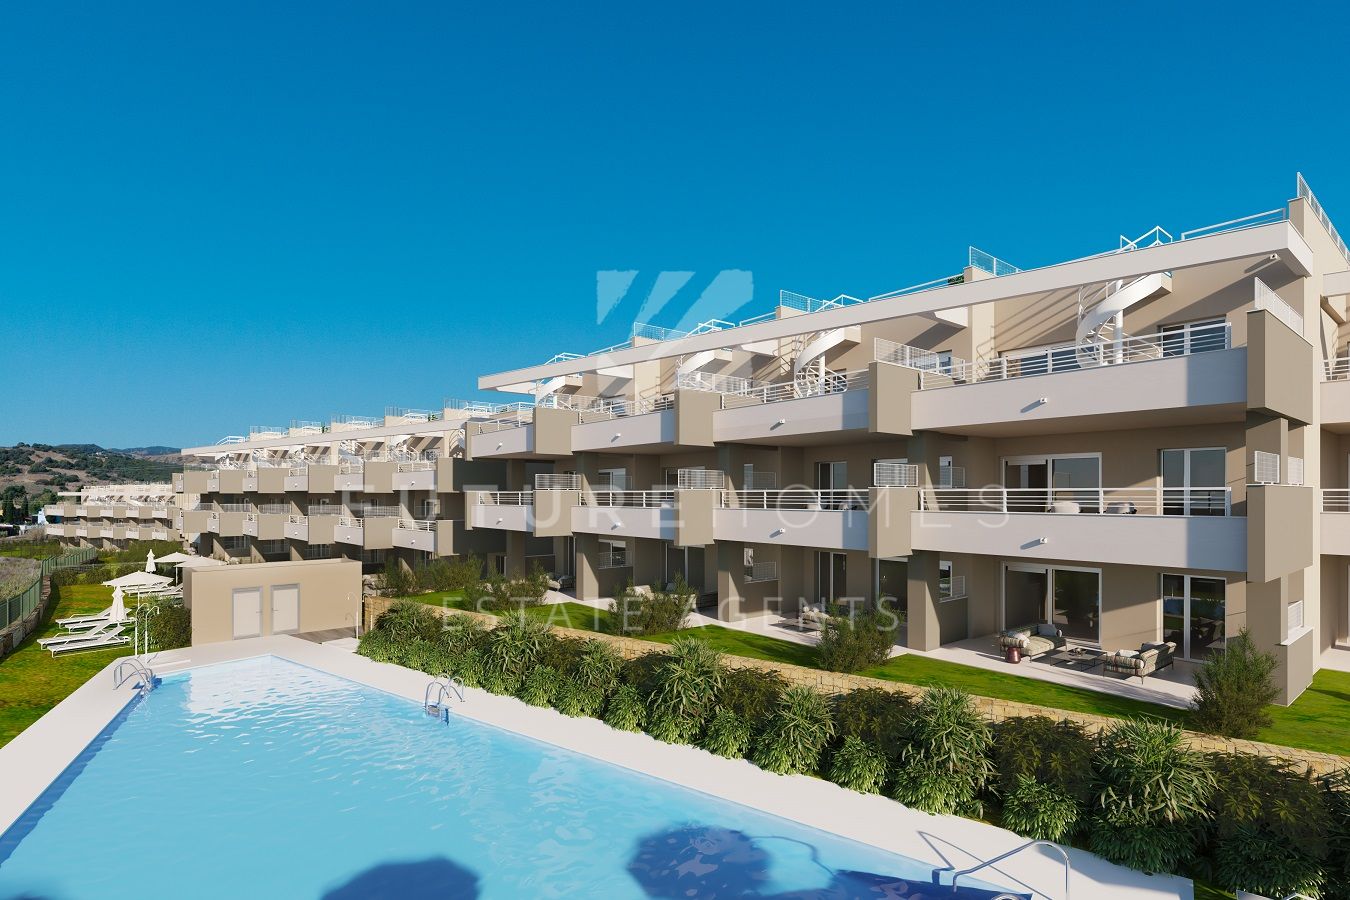 BRAND NEW DEVELOPMENT IN ESTEPONA GOLF, only 10 minutes drive from Estepona!